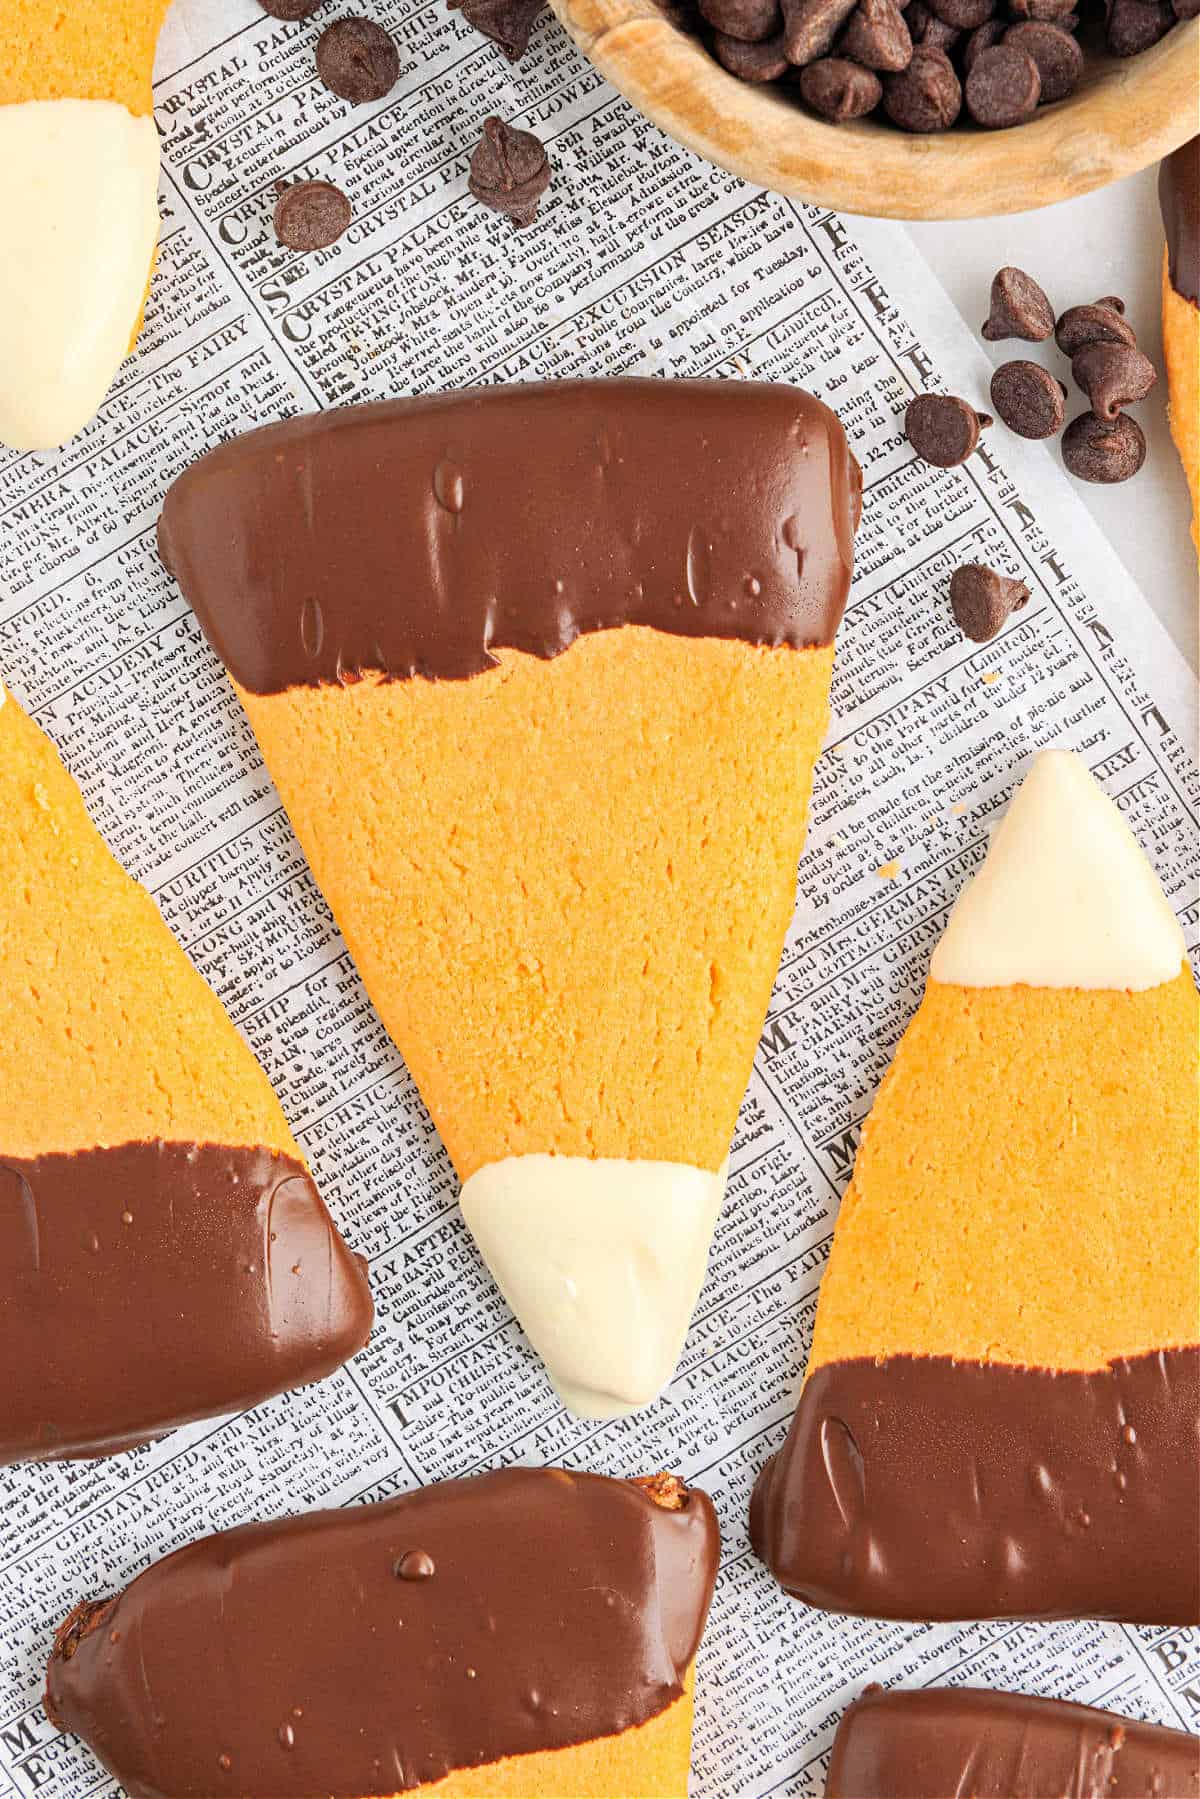 Sugar cookies shaped like candy corn with melted chocolate.